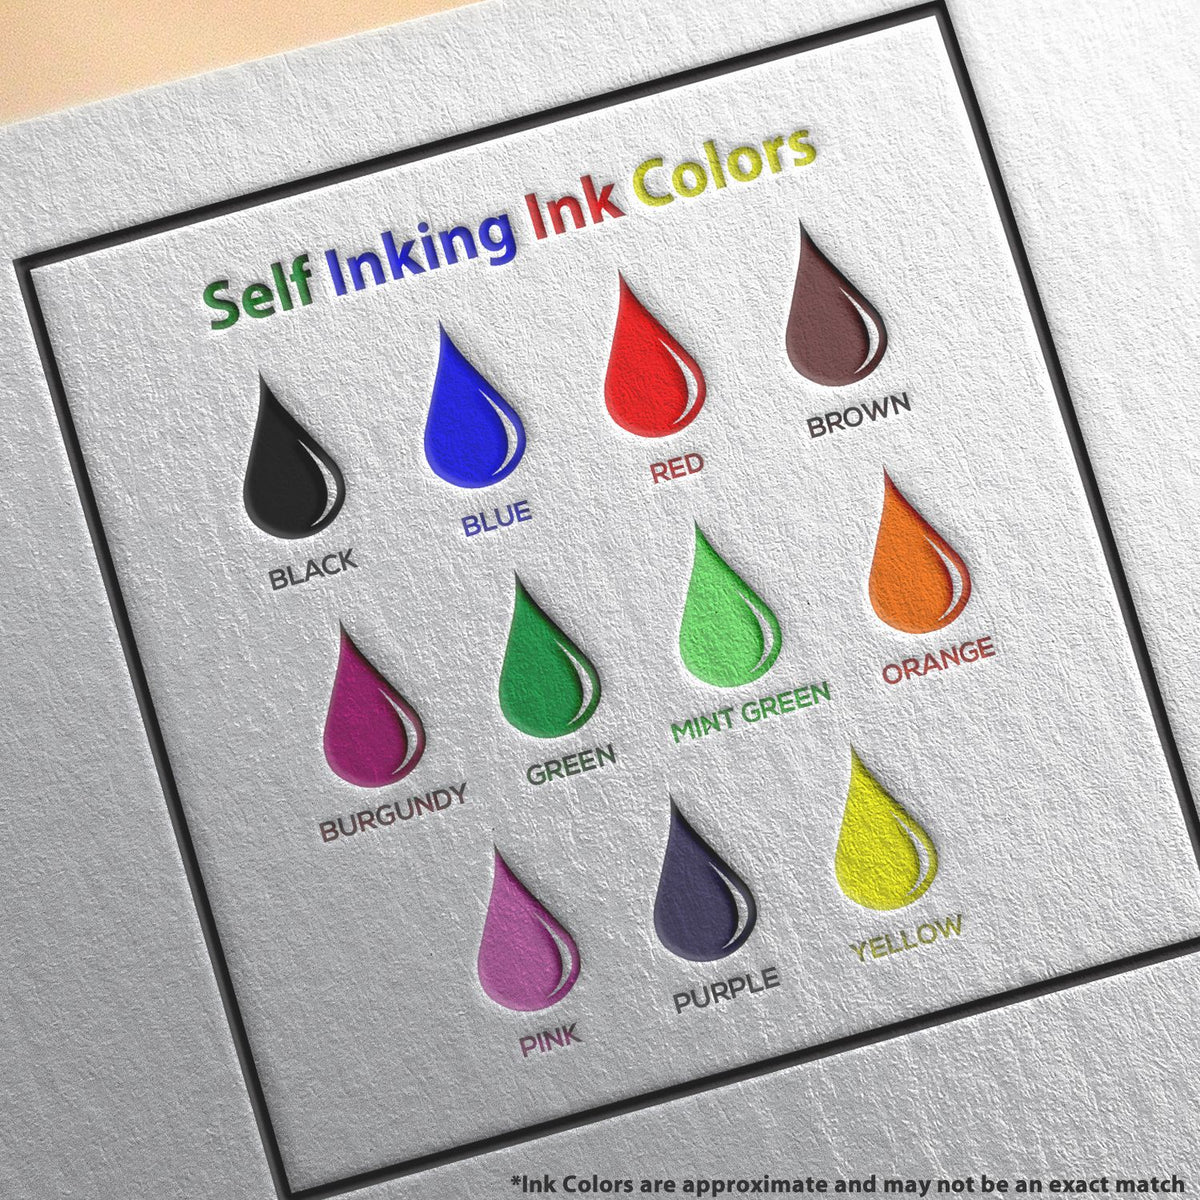 A picture showing the different ink colors or hues available for the Self-Inking Rectangular Wyoming Notary Stamp product.